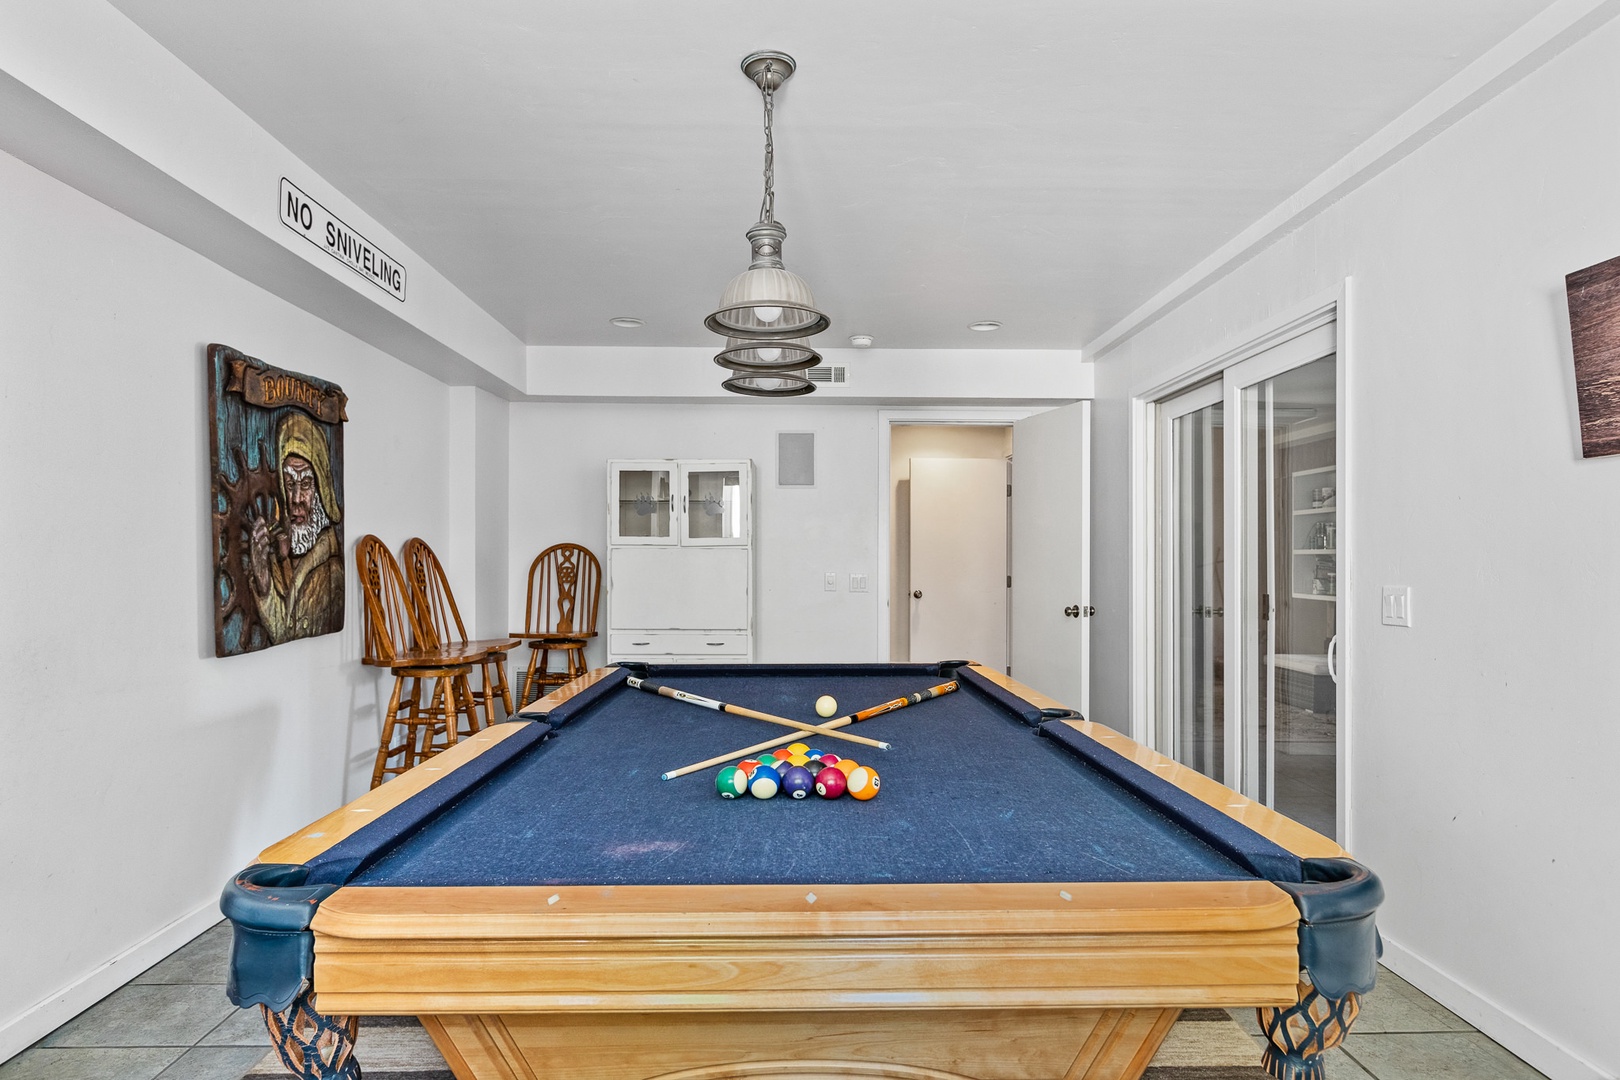 Game room is equipped with a pool table